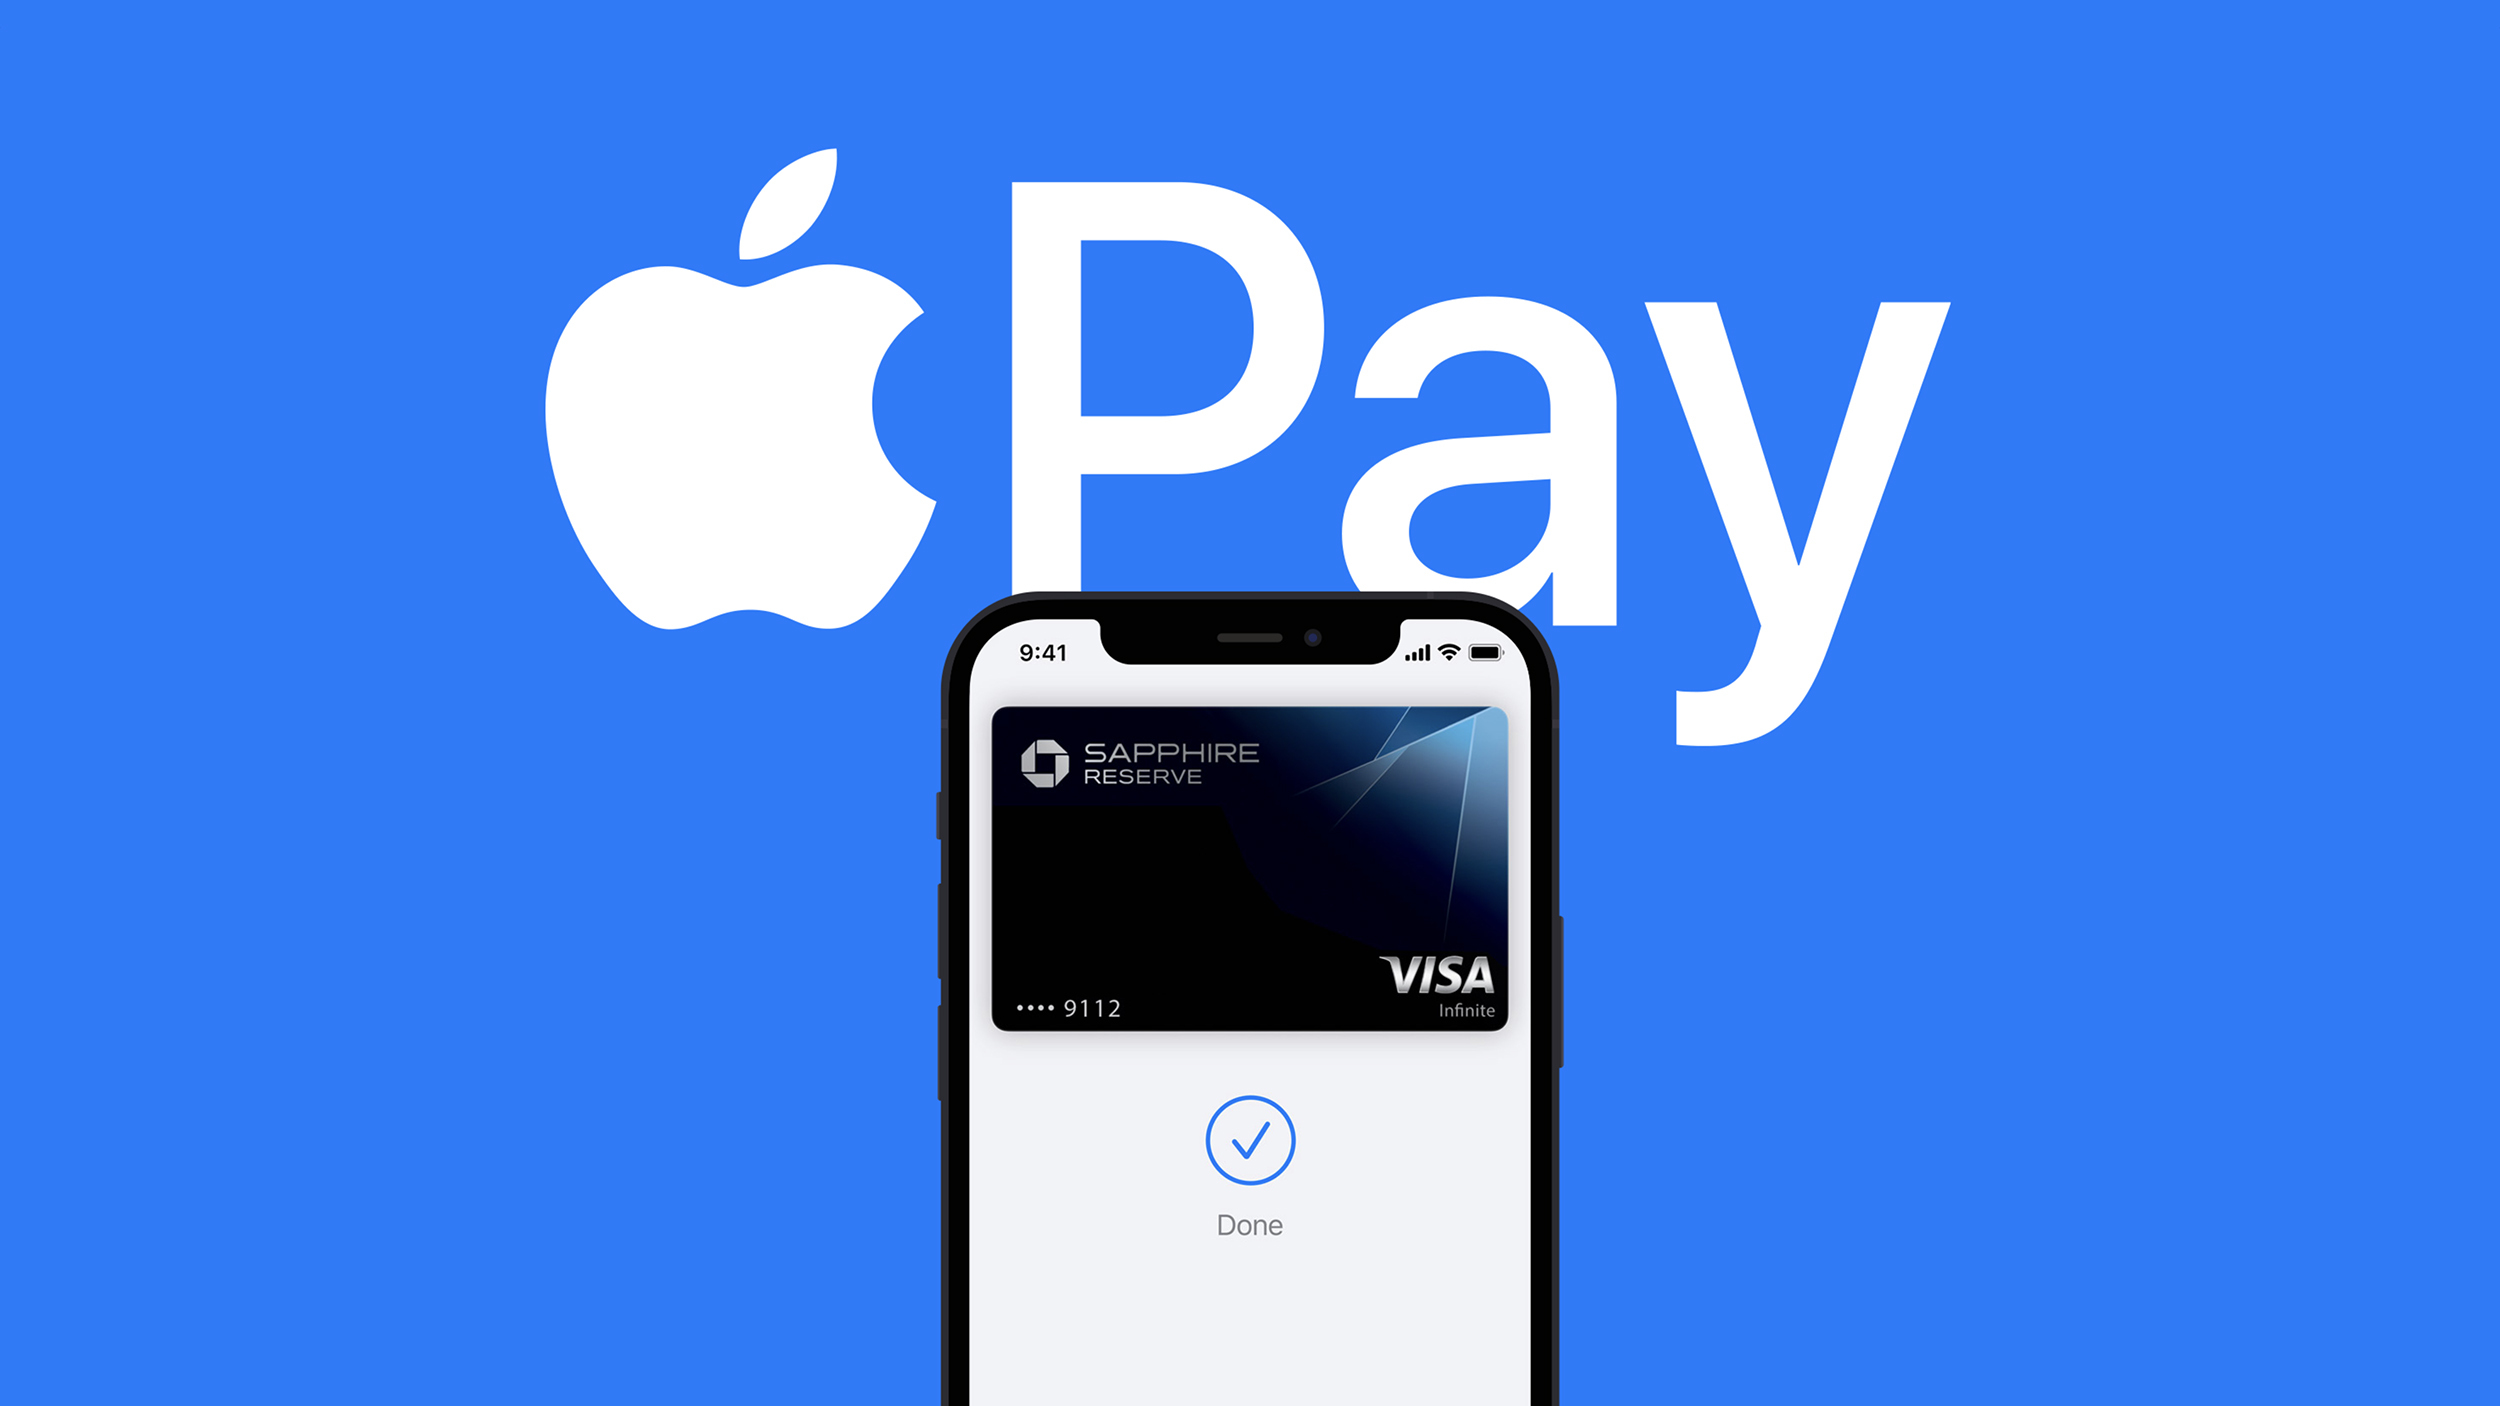 Walmart Still Doesn’t Accept Apple Pay in U.S. Despite Many Customer Requests